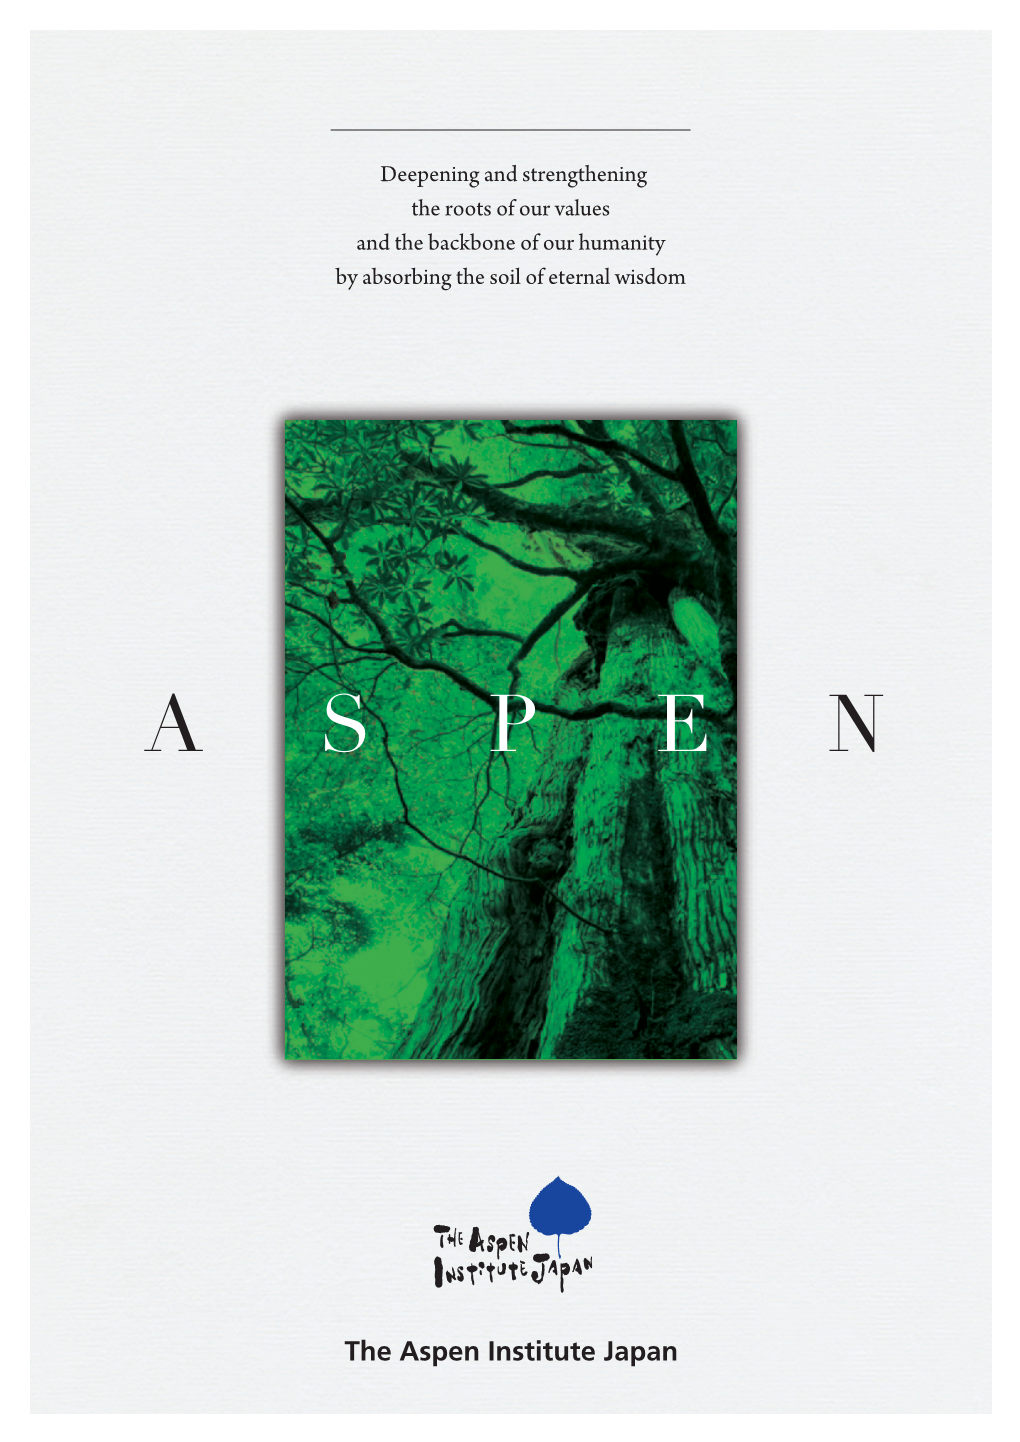 The Aspen Institute Japan Dialogues with the Authors